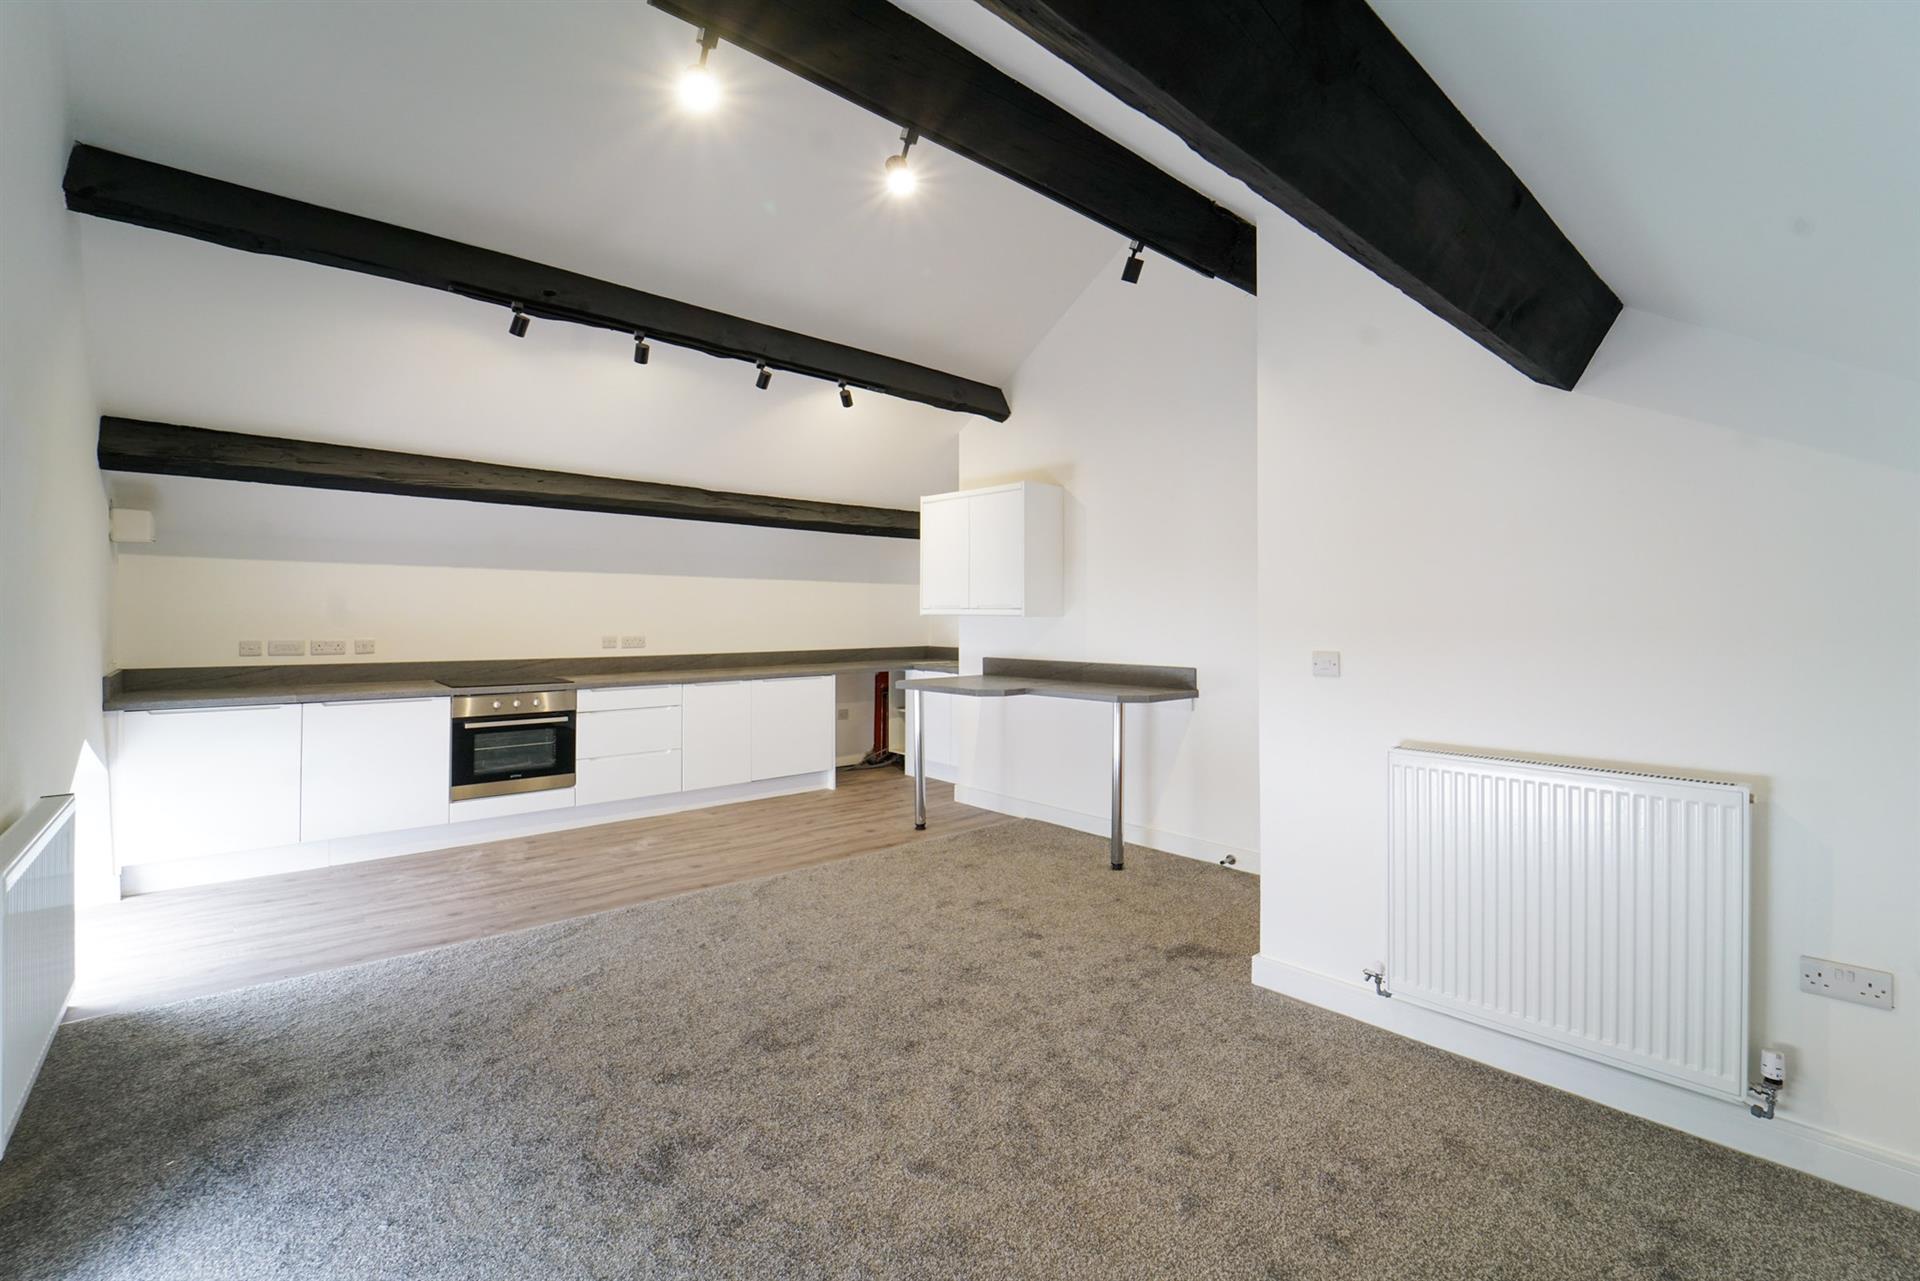 2 bedroom apartment flat / apartment To Let in 96 Watery Lane, Whitehall, Darwen, Lancs - Property photograph